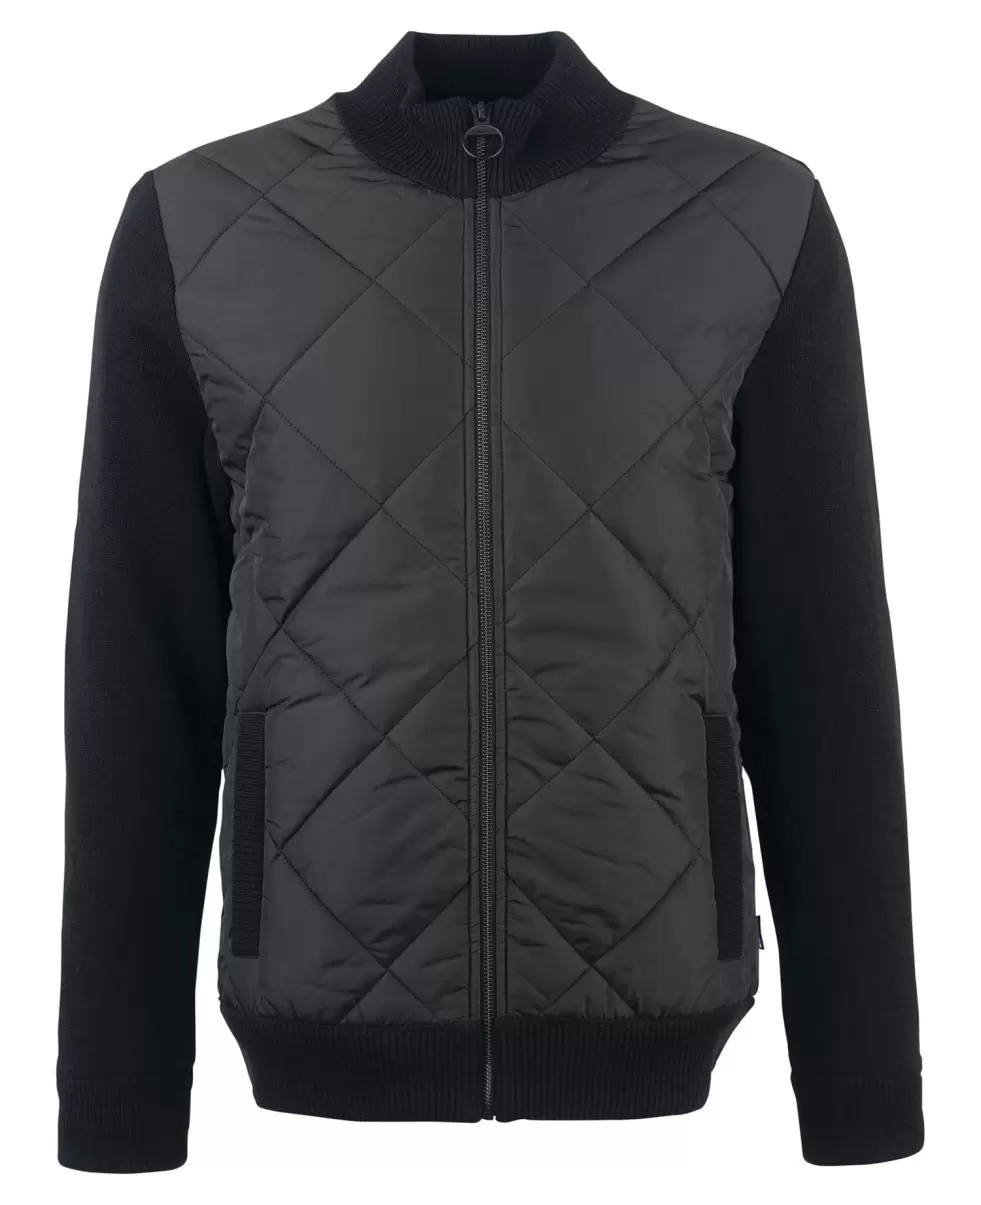 Jumpers Exclusive Black Men Barbour Arch Diamond-Quilted Jumper - 1